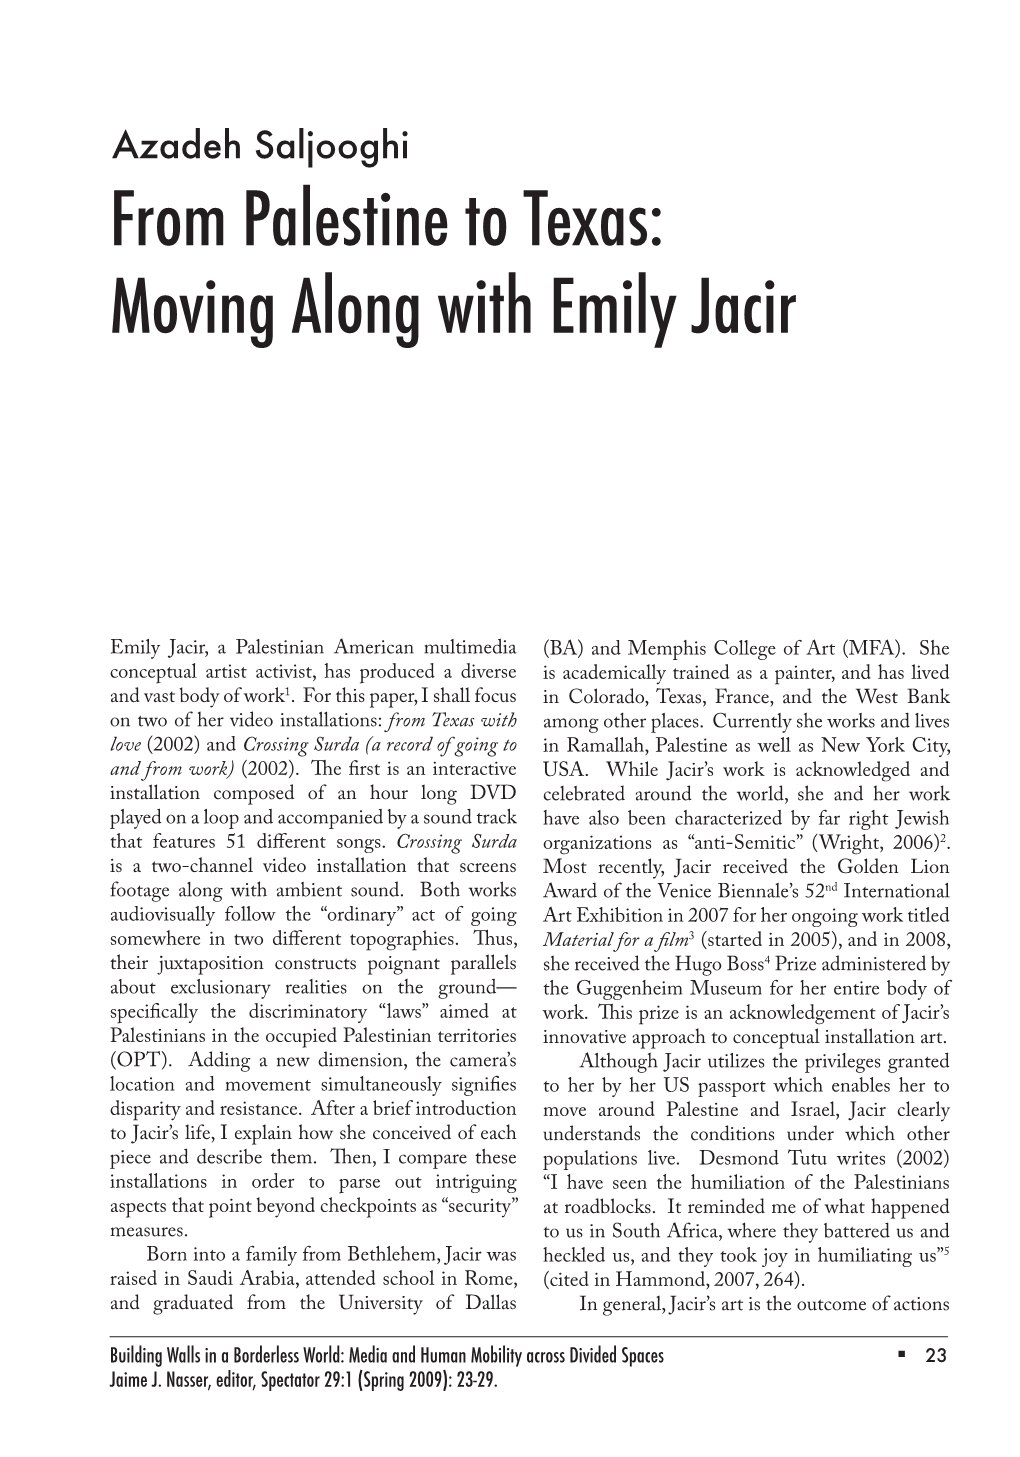 From Palestine to Texas: Moving Along with Emily Jacir